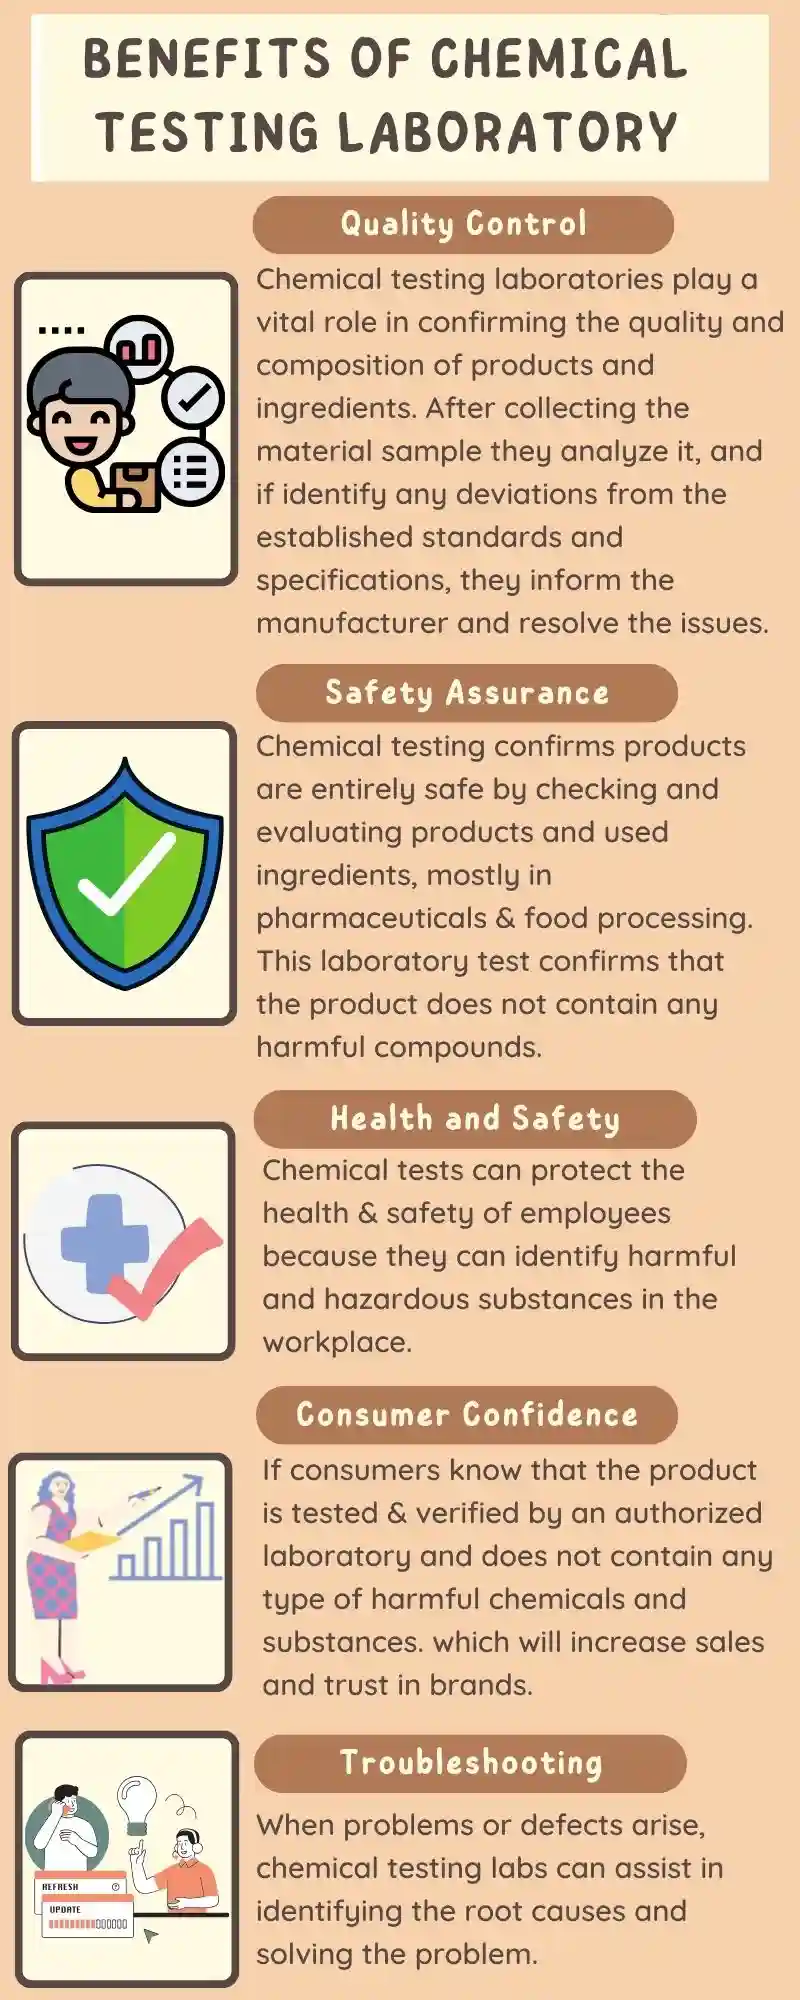 Top 5 Benefits of Chemical Testing Laboratory